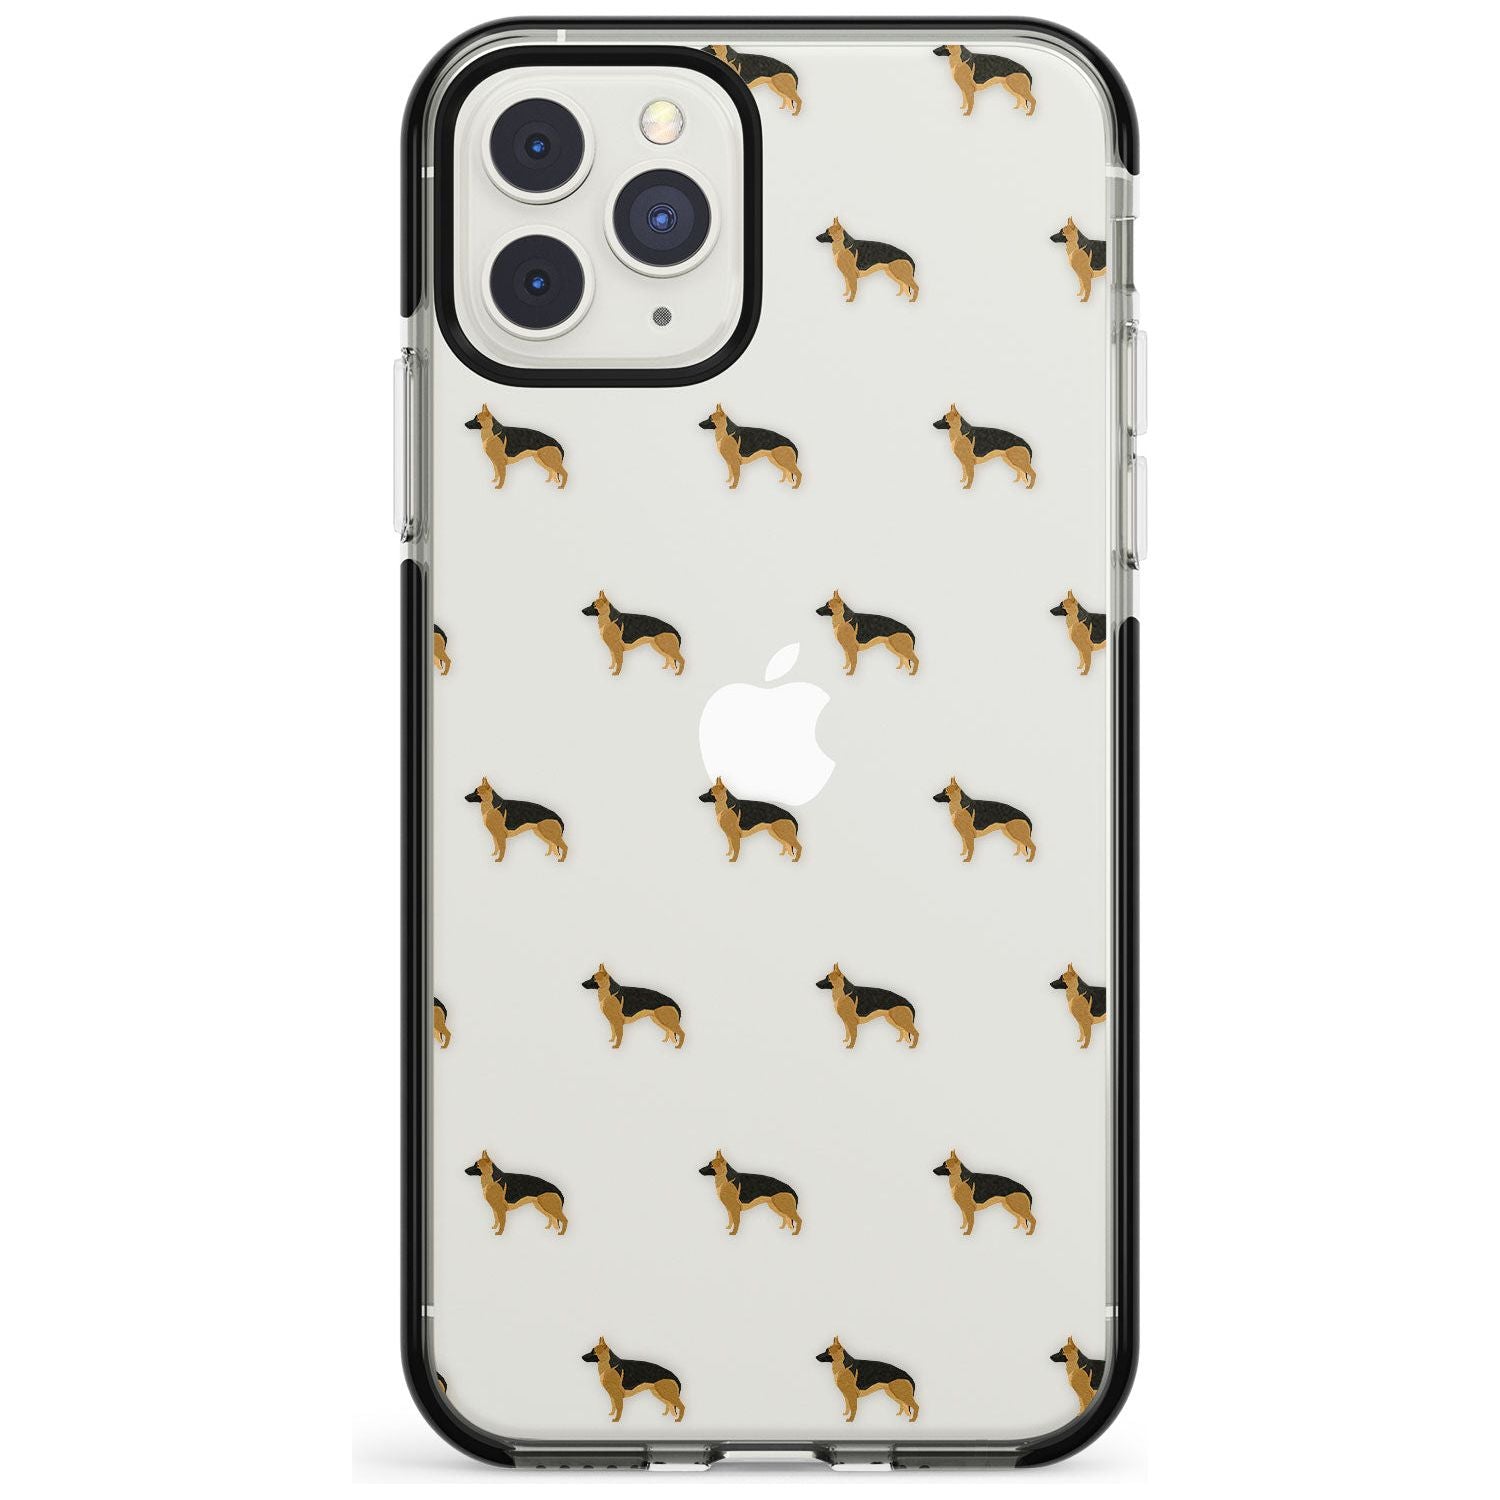 German Sherpard Dog Pattern Clear Black Impact Phone Case for iPhone 11 Pro Max